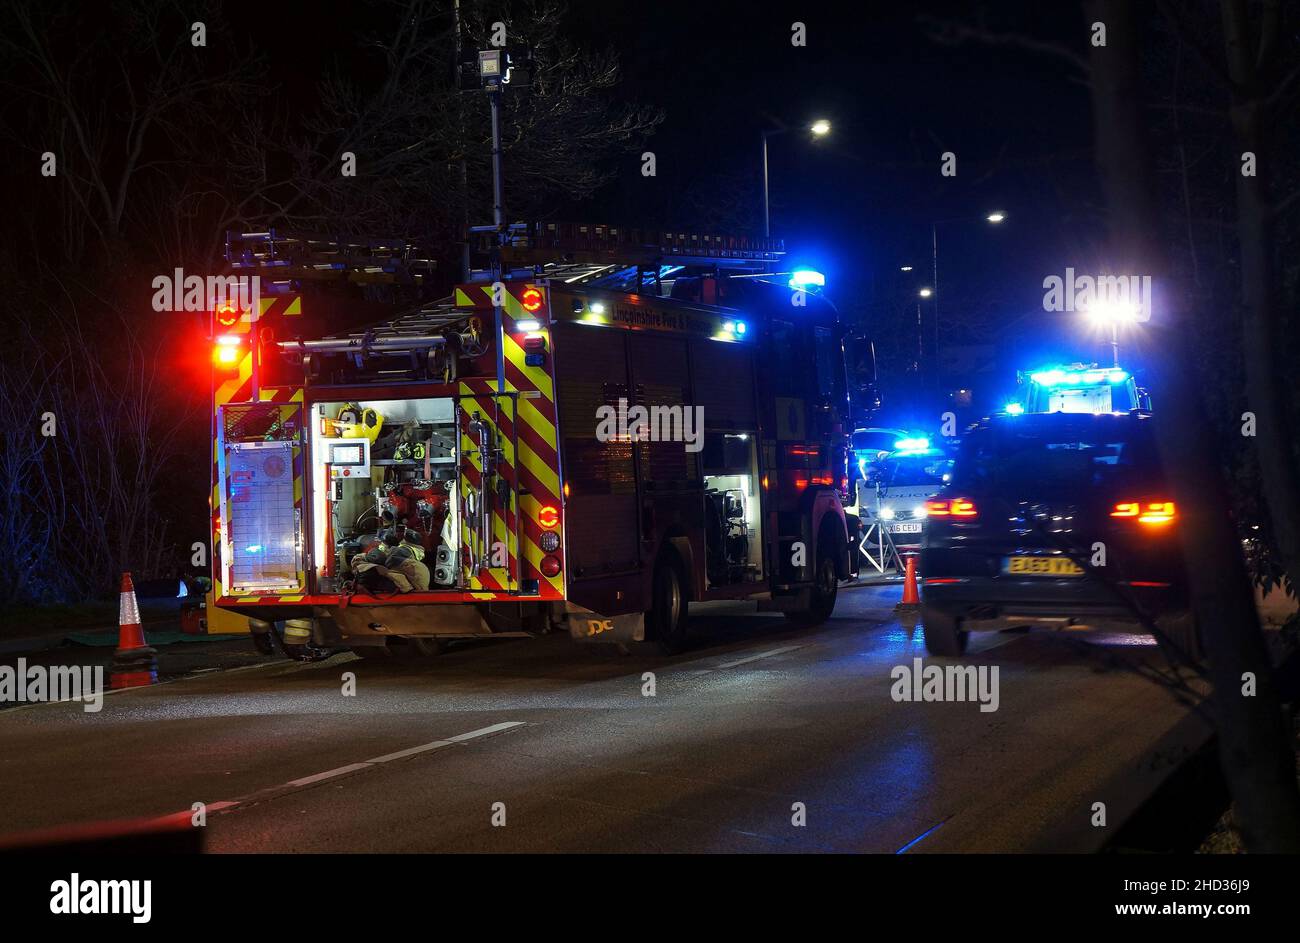 accident scene on the Spalding road at night with flashing lights from emergency vehicles Stock Photo